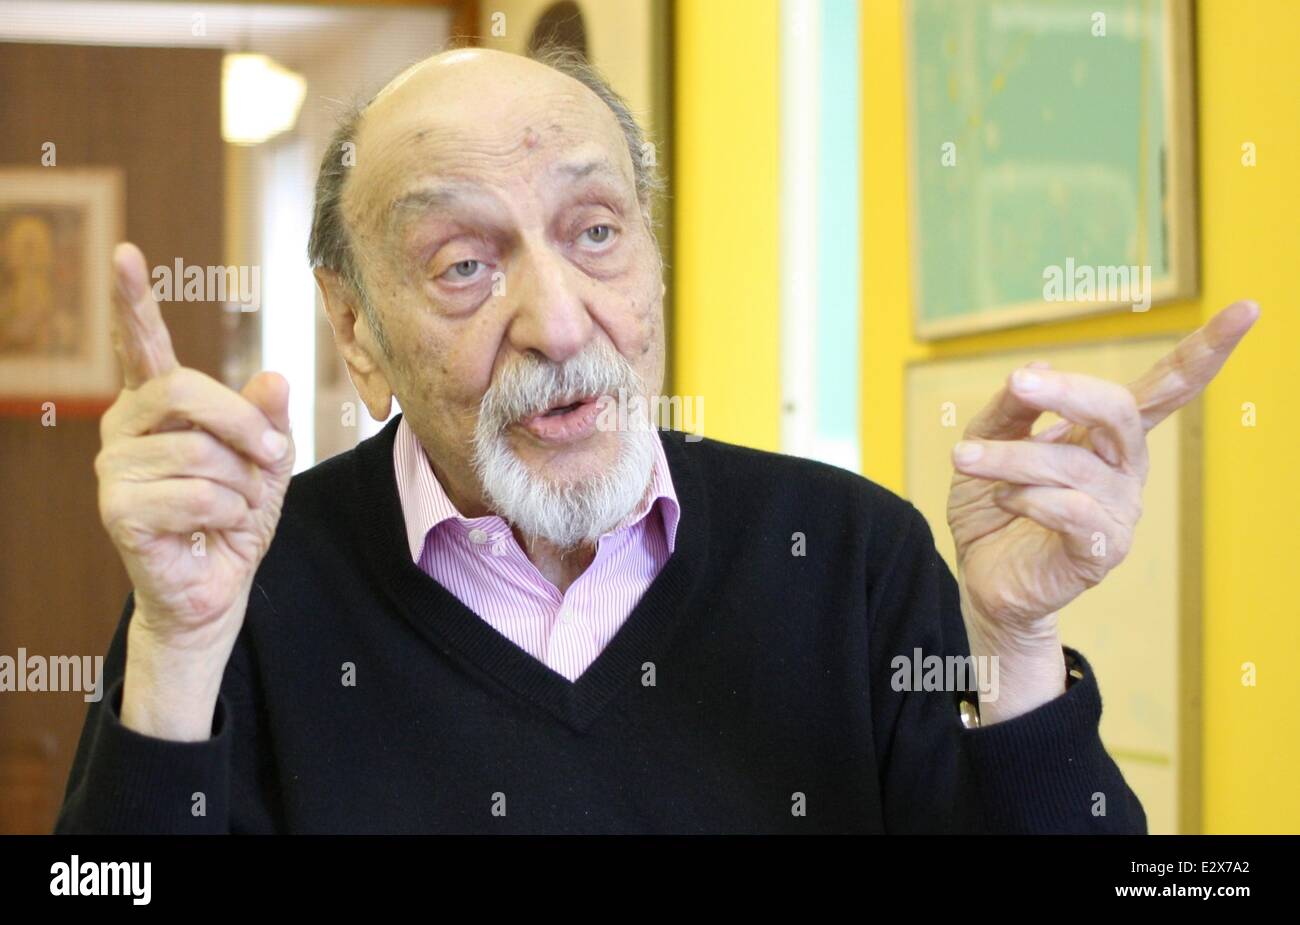 New York, USA. 20th May, 2014. US designer Milton Glaser gestures during an interview at his office in New York, USA, 20 May 2014. He is the creator of of the famouse and beloved 'I love New York' logo. The designe will turn 85 on 26 June 2014. Photo: CHRISTINA HORSTEN/dpa/Alamy Live News Stock Photo